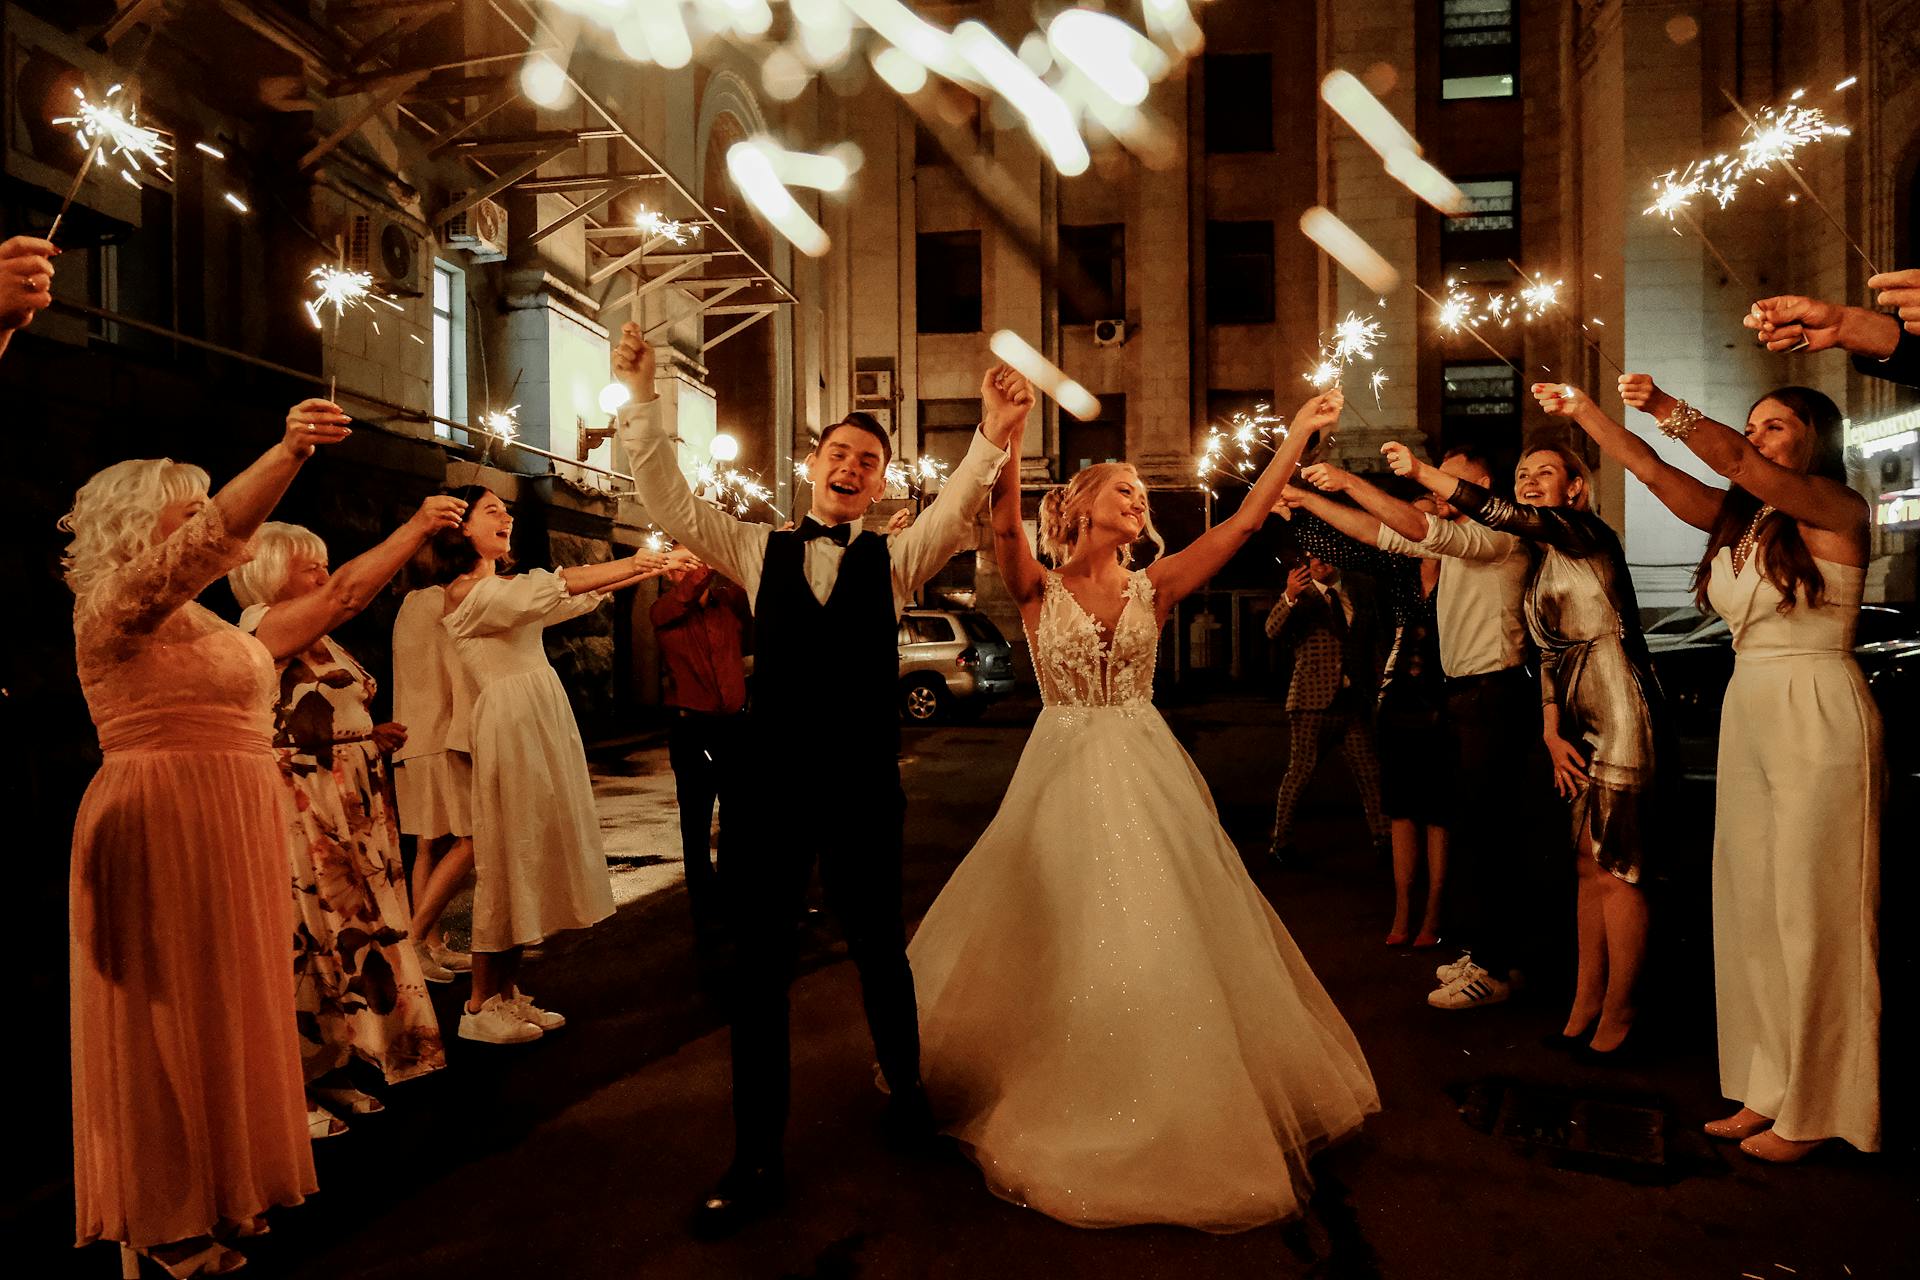 Happy friends and newlywed couple celebrating their wedding at night | Source: Pexels